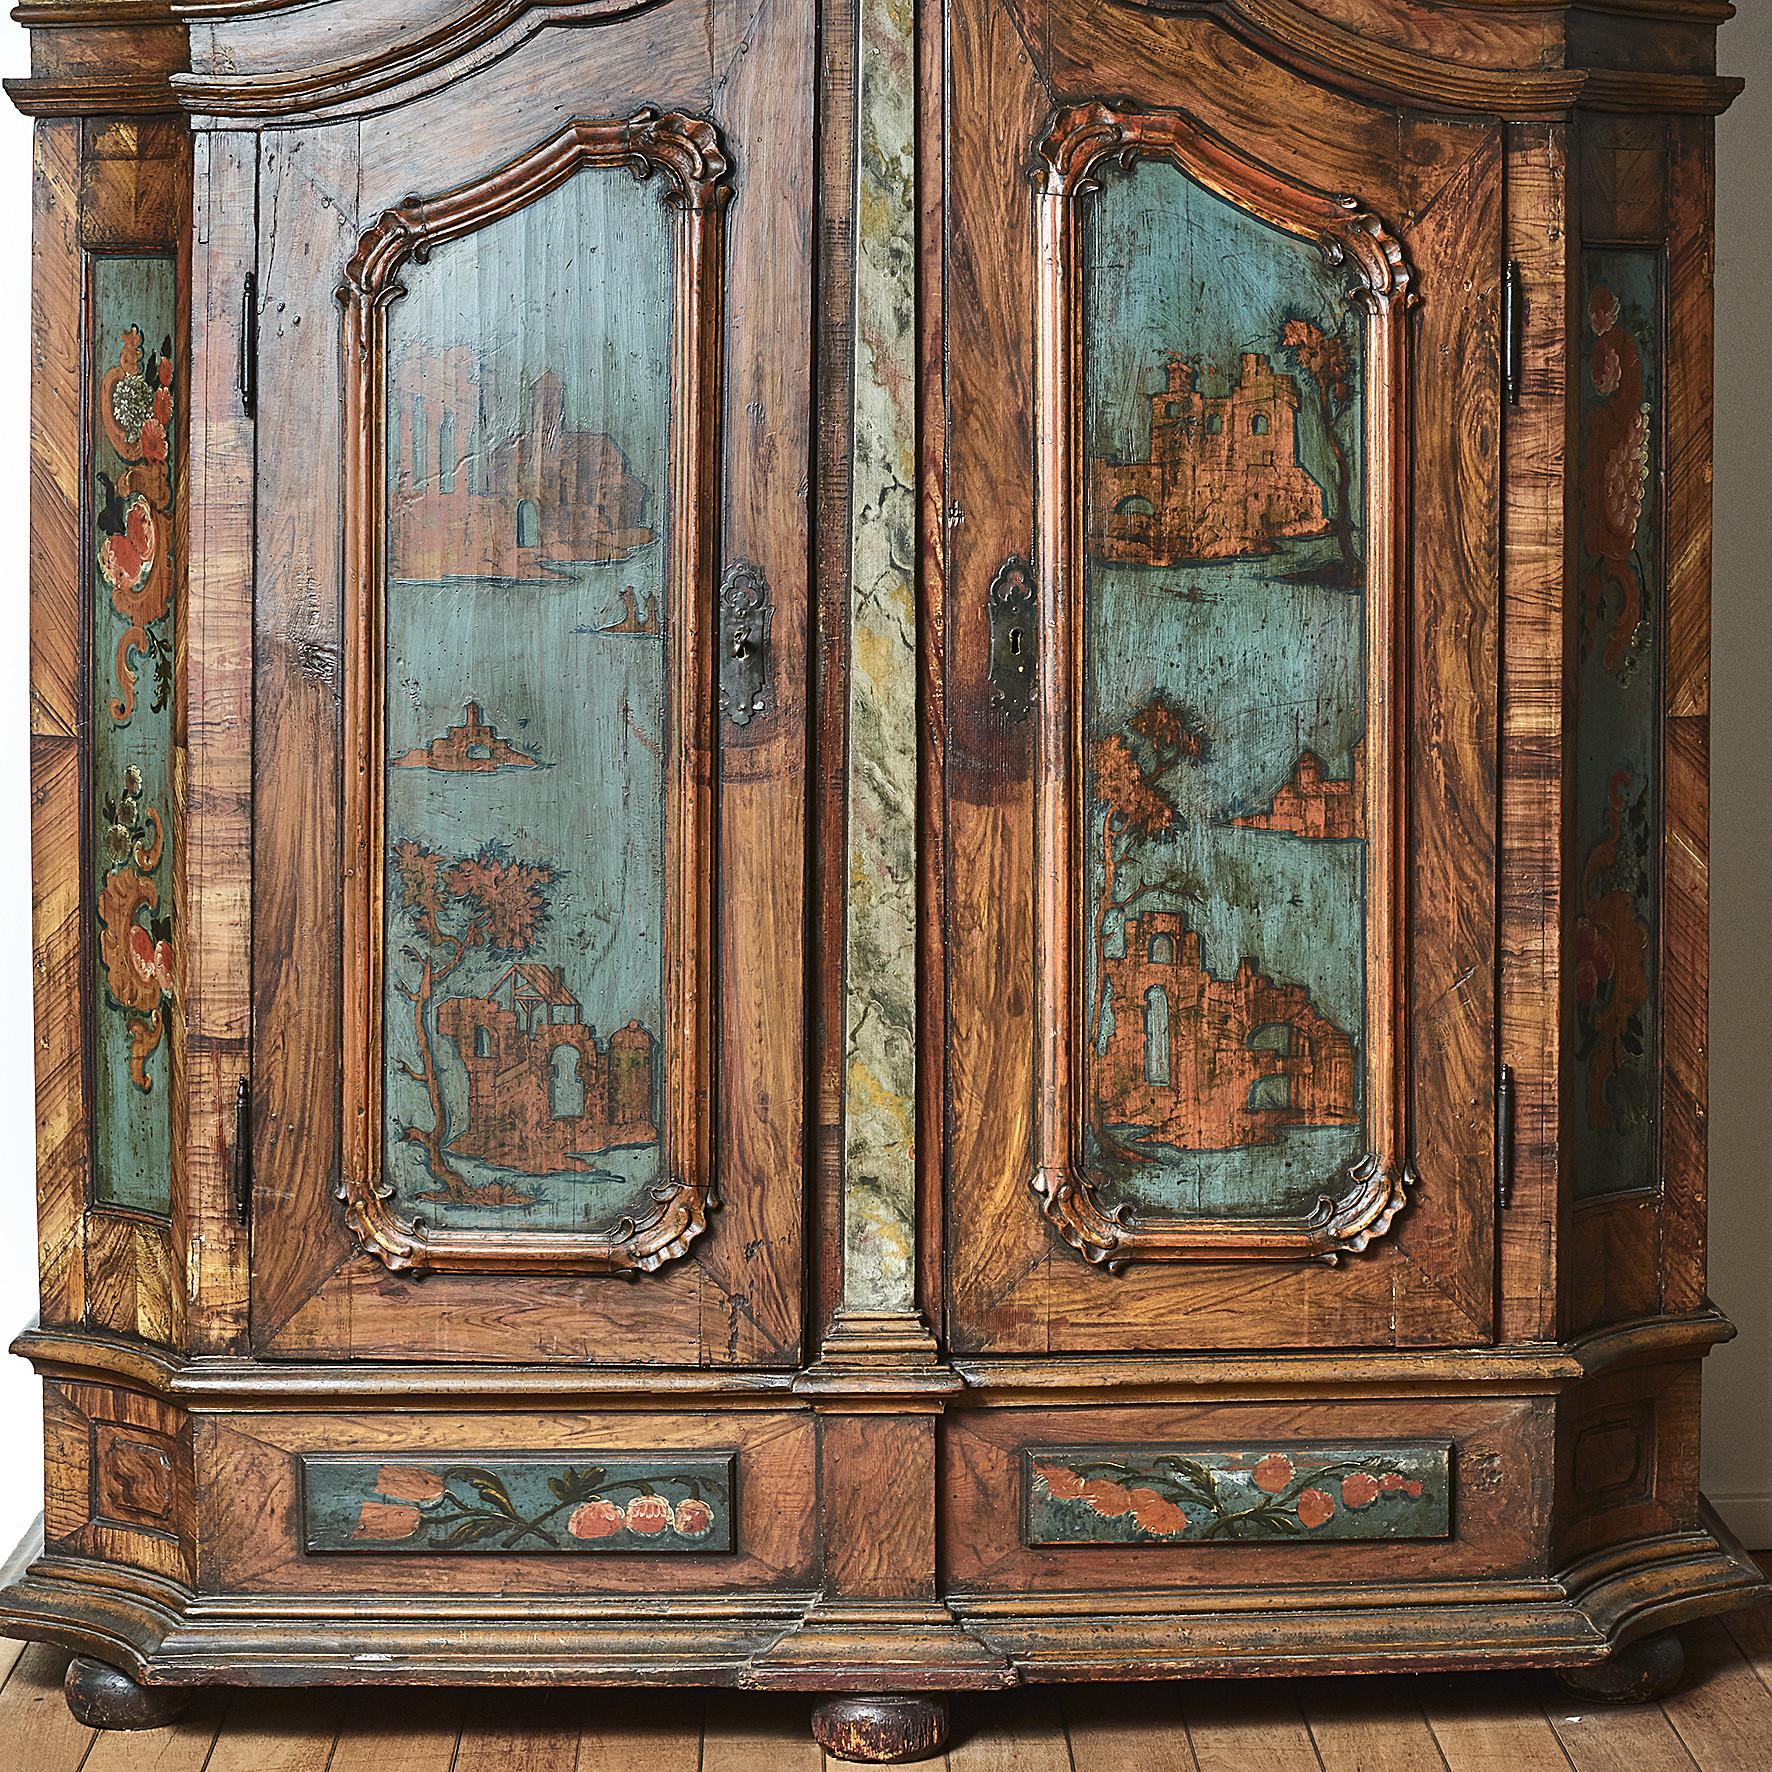 18th century Norwegian rococo cabinet with a large decorative pediment, original painted and decorated in polychrome color.
A fantastic and richly carved cabinet flanked by concave panels. 100% original condition.
Untouched in mint condition.
 